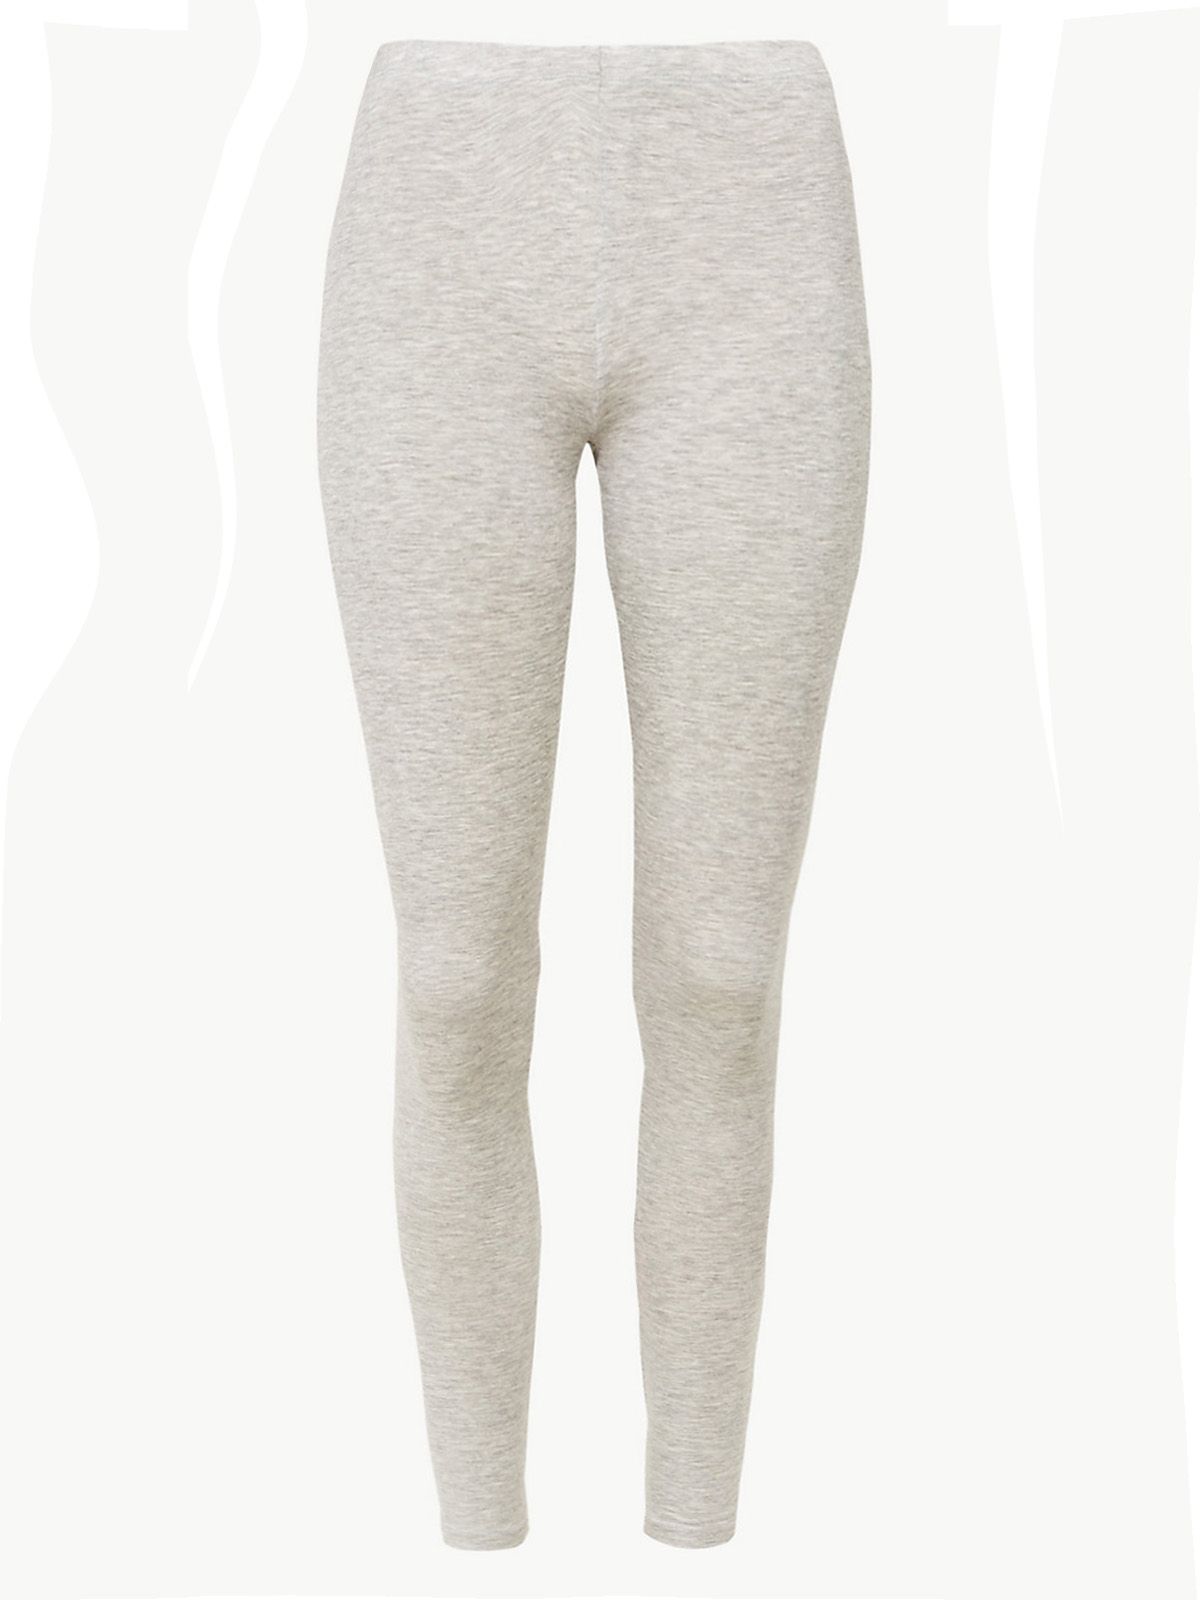 Marks and Spencer - - M&5 GREY-MARL Heatgen Thermal Leggings - Size 6 to 22